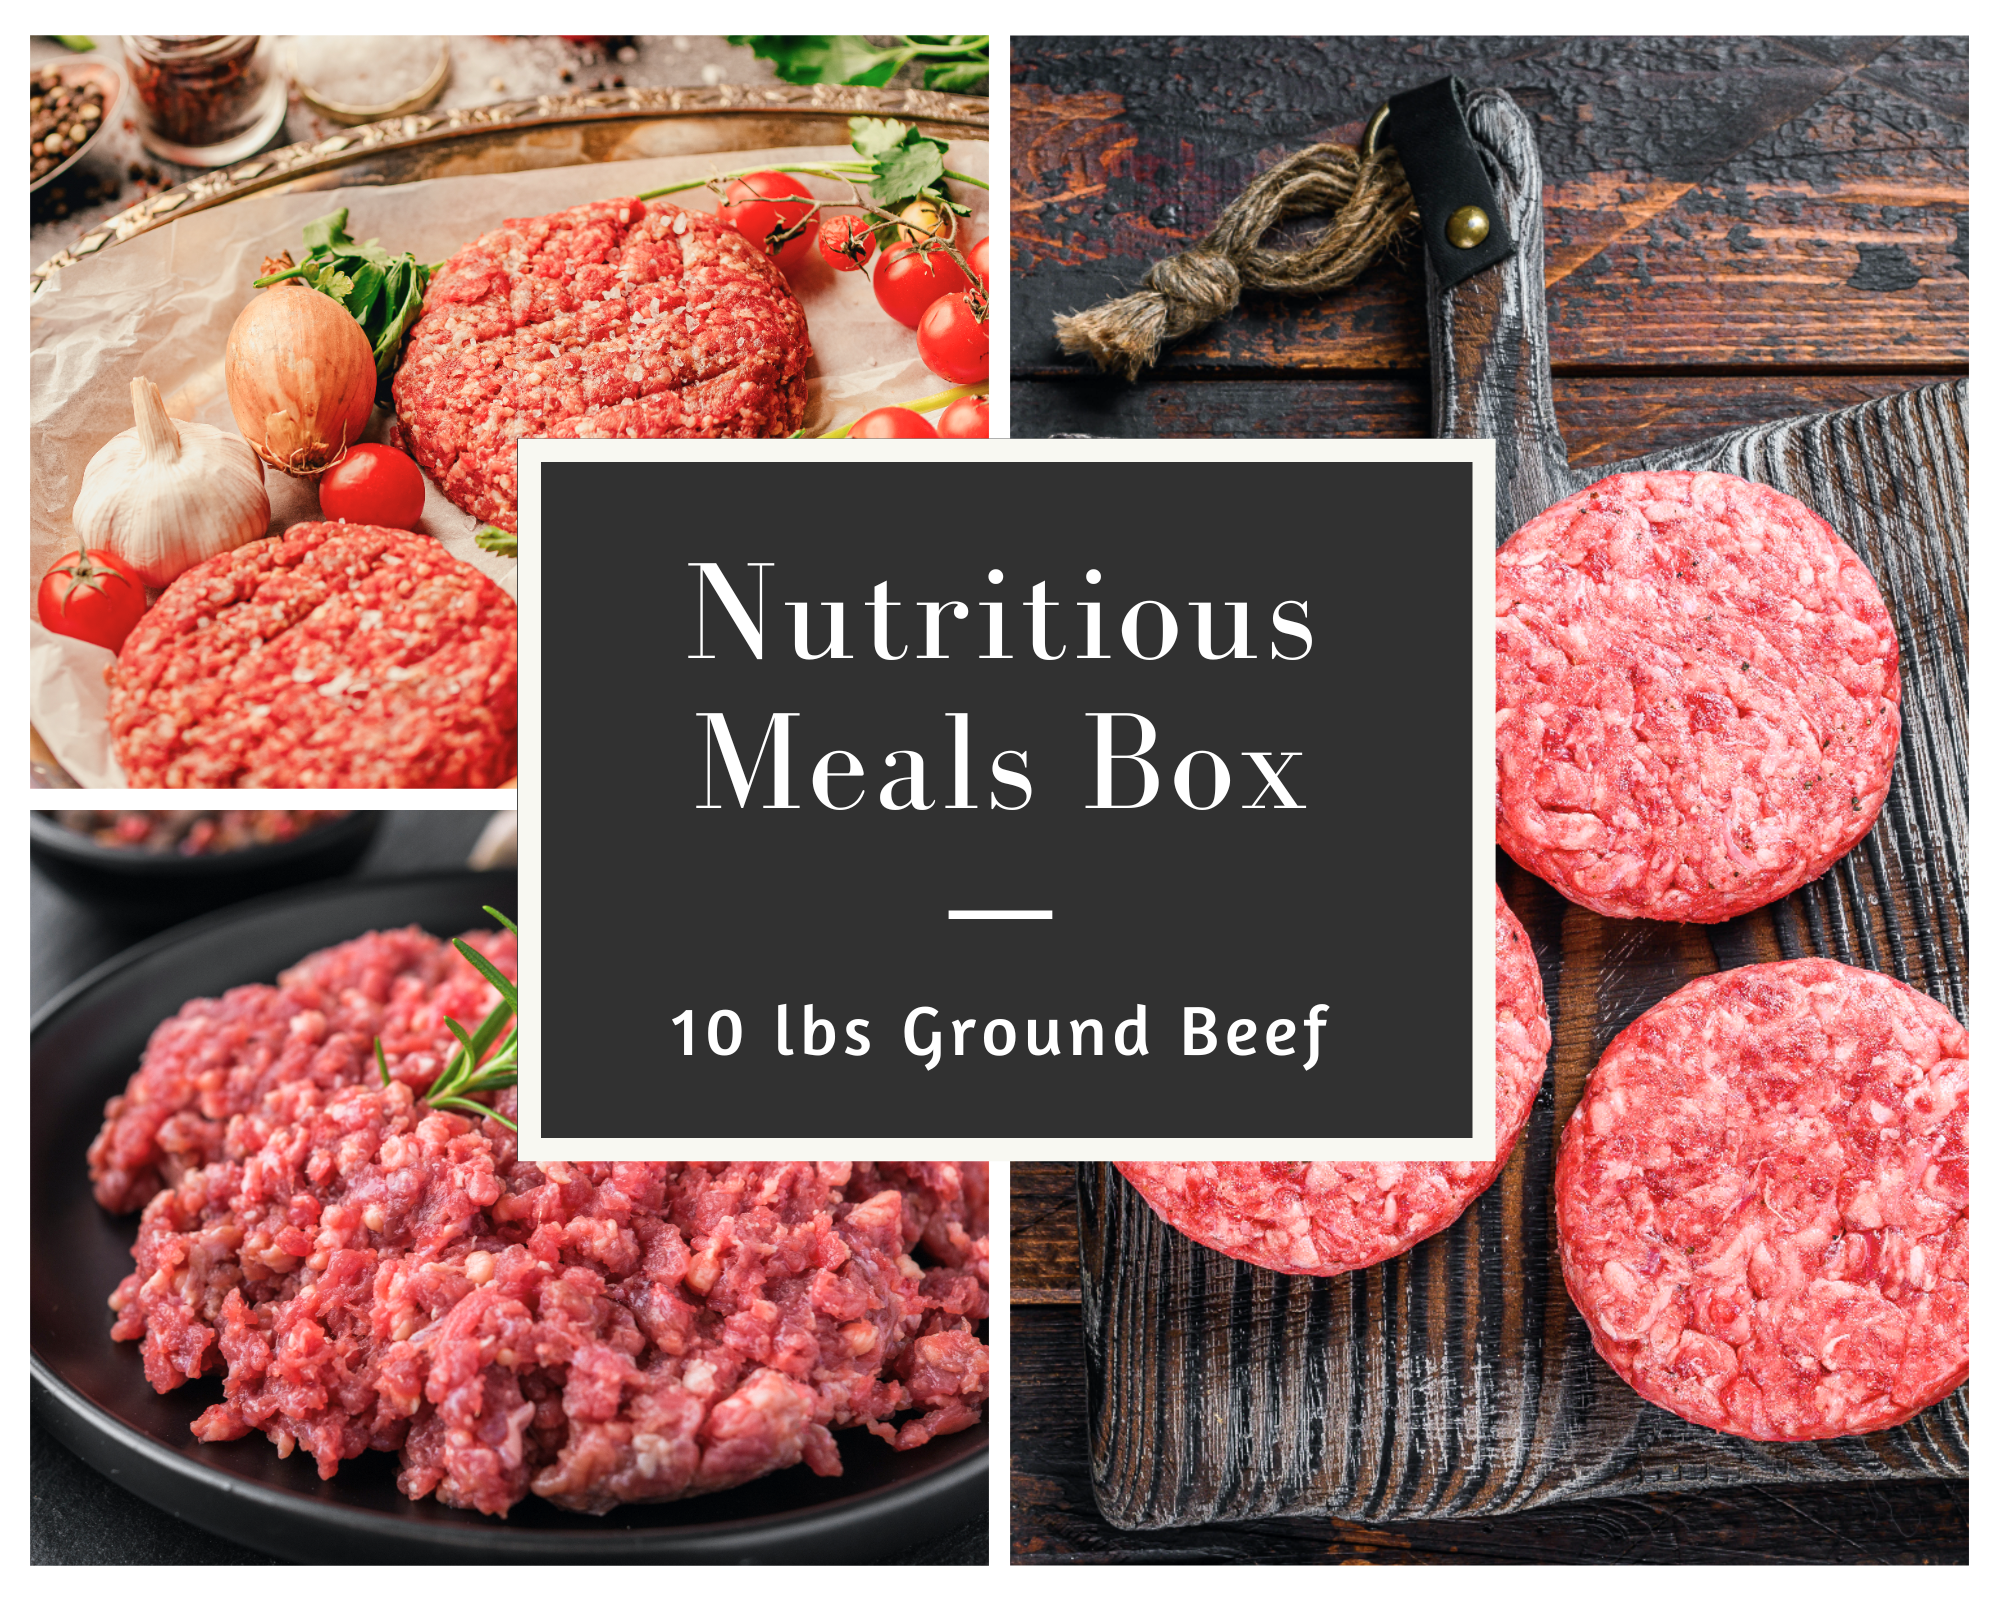 Nutritious Meals Box - 10lb Ground Beef